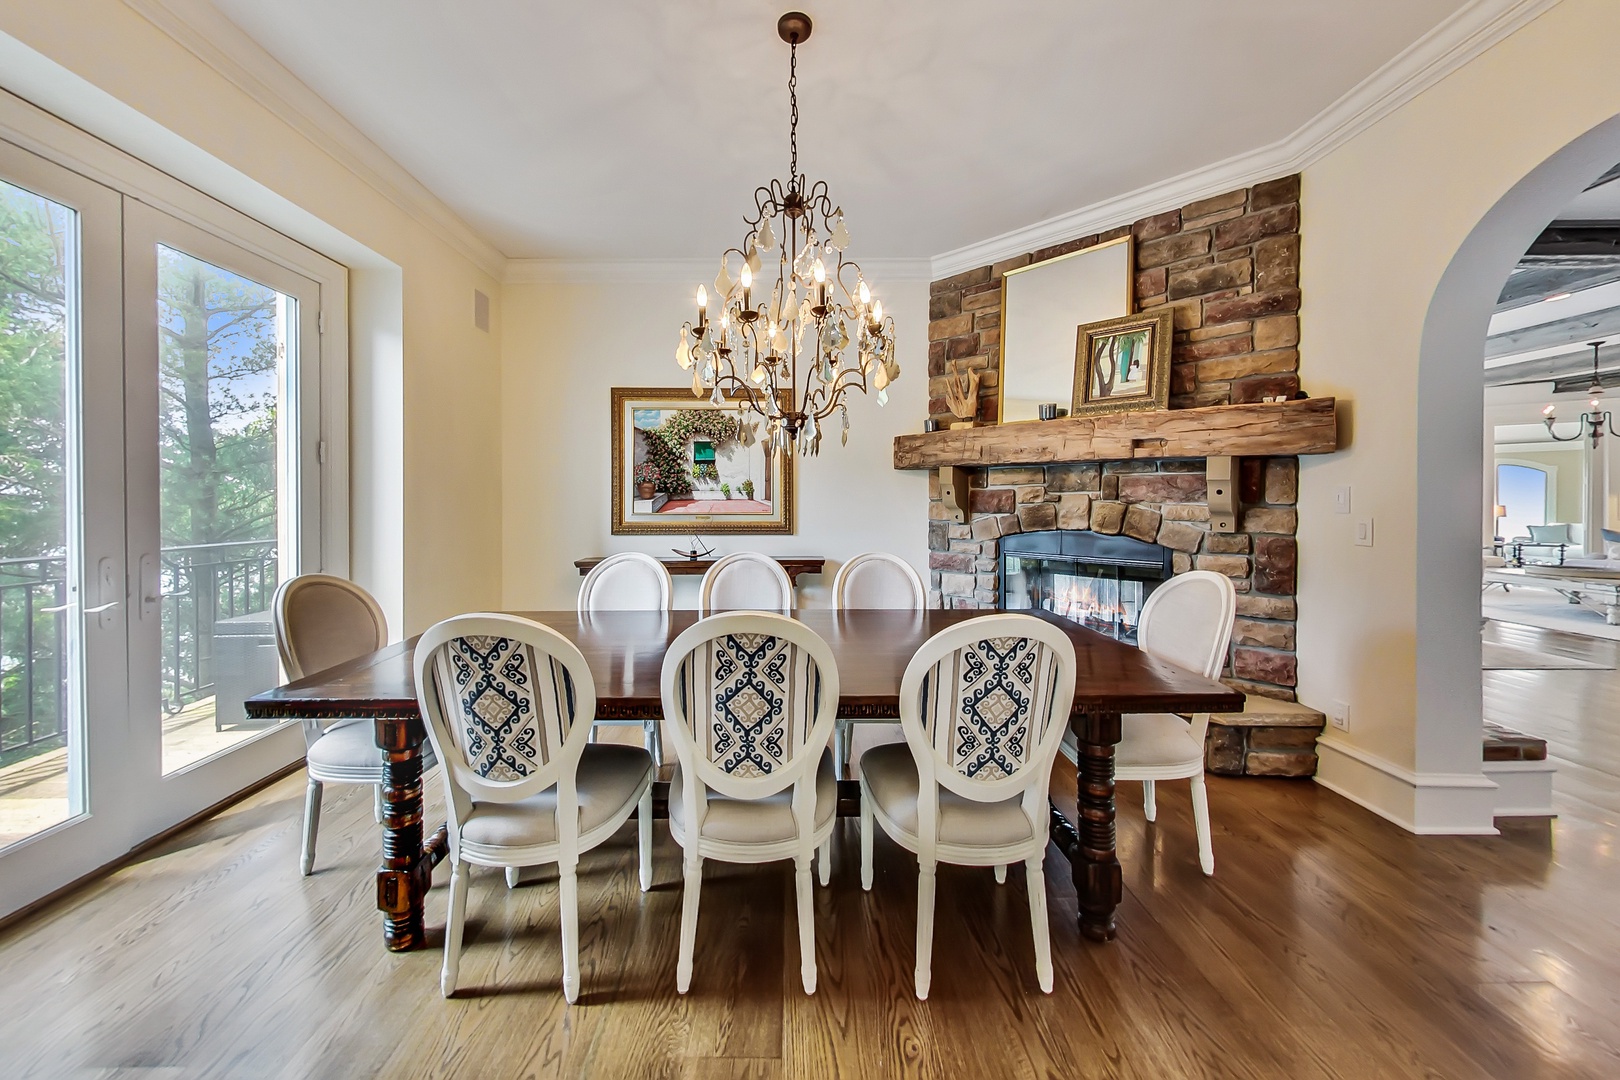 Besides a handsome stone fireplace, this formal dining room has a dazzling view.